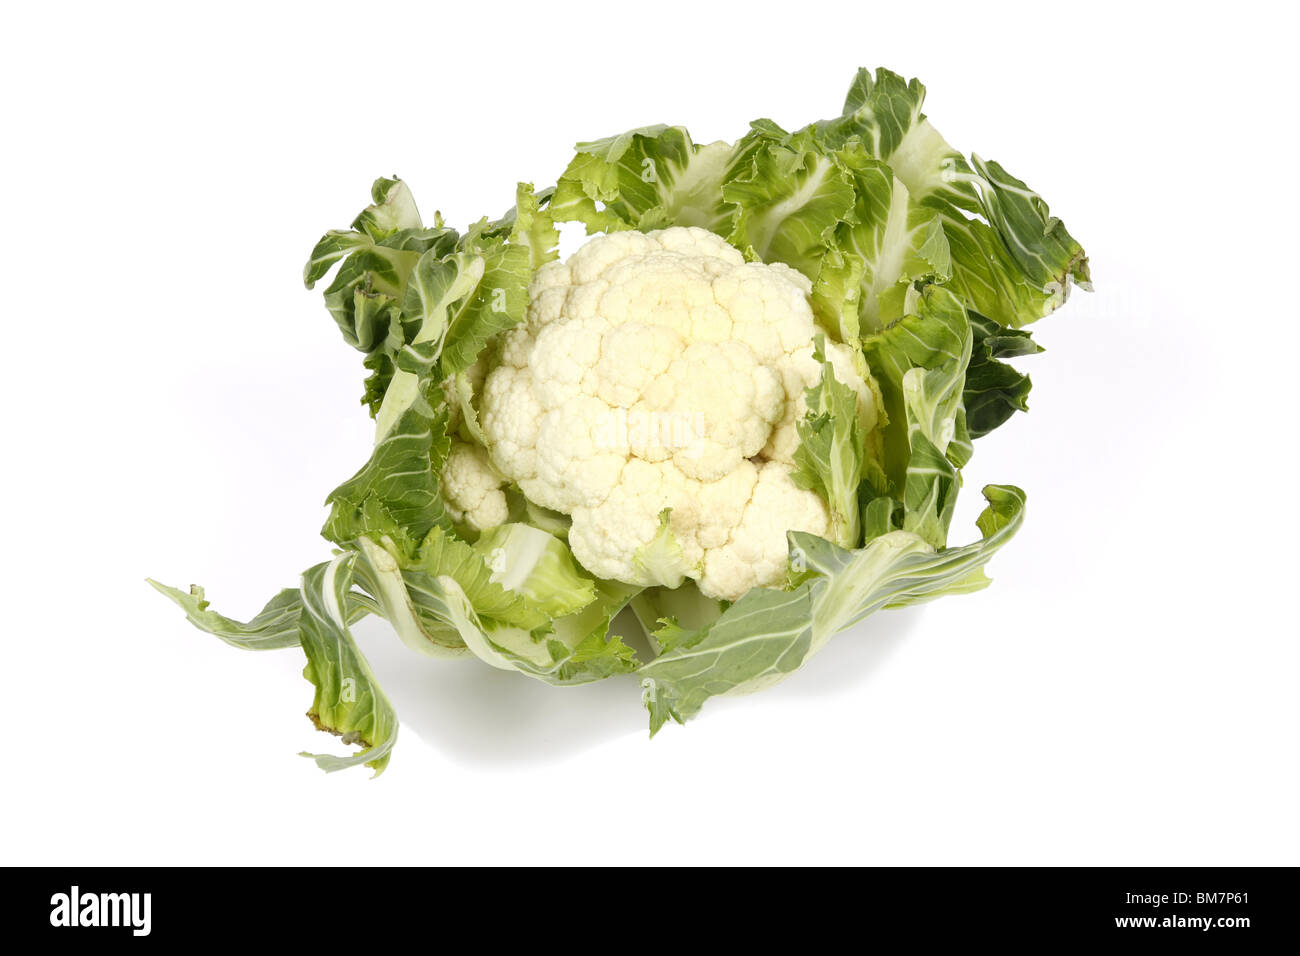 A Cauliflower vegetable against a white background Stock Photo